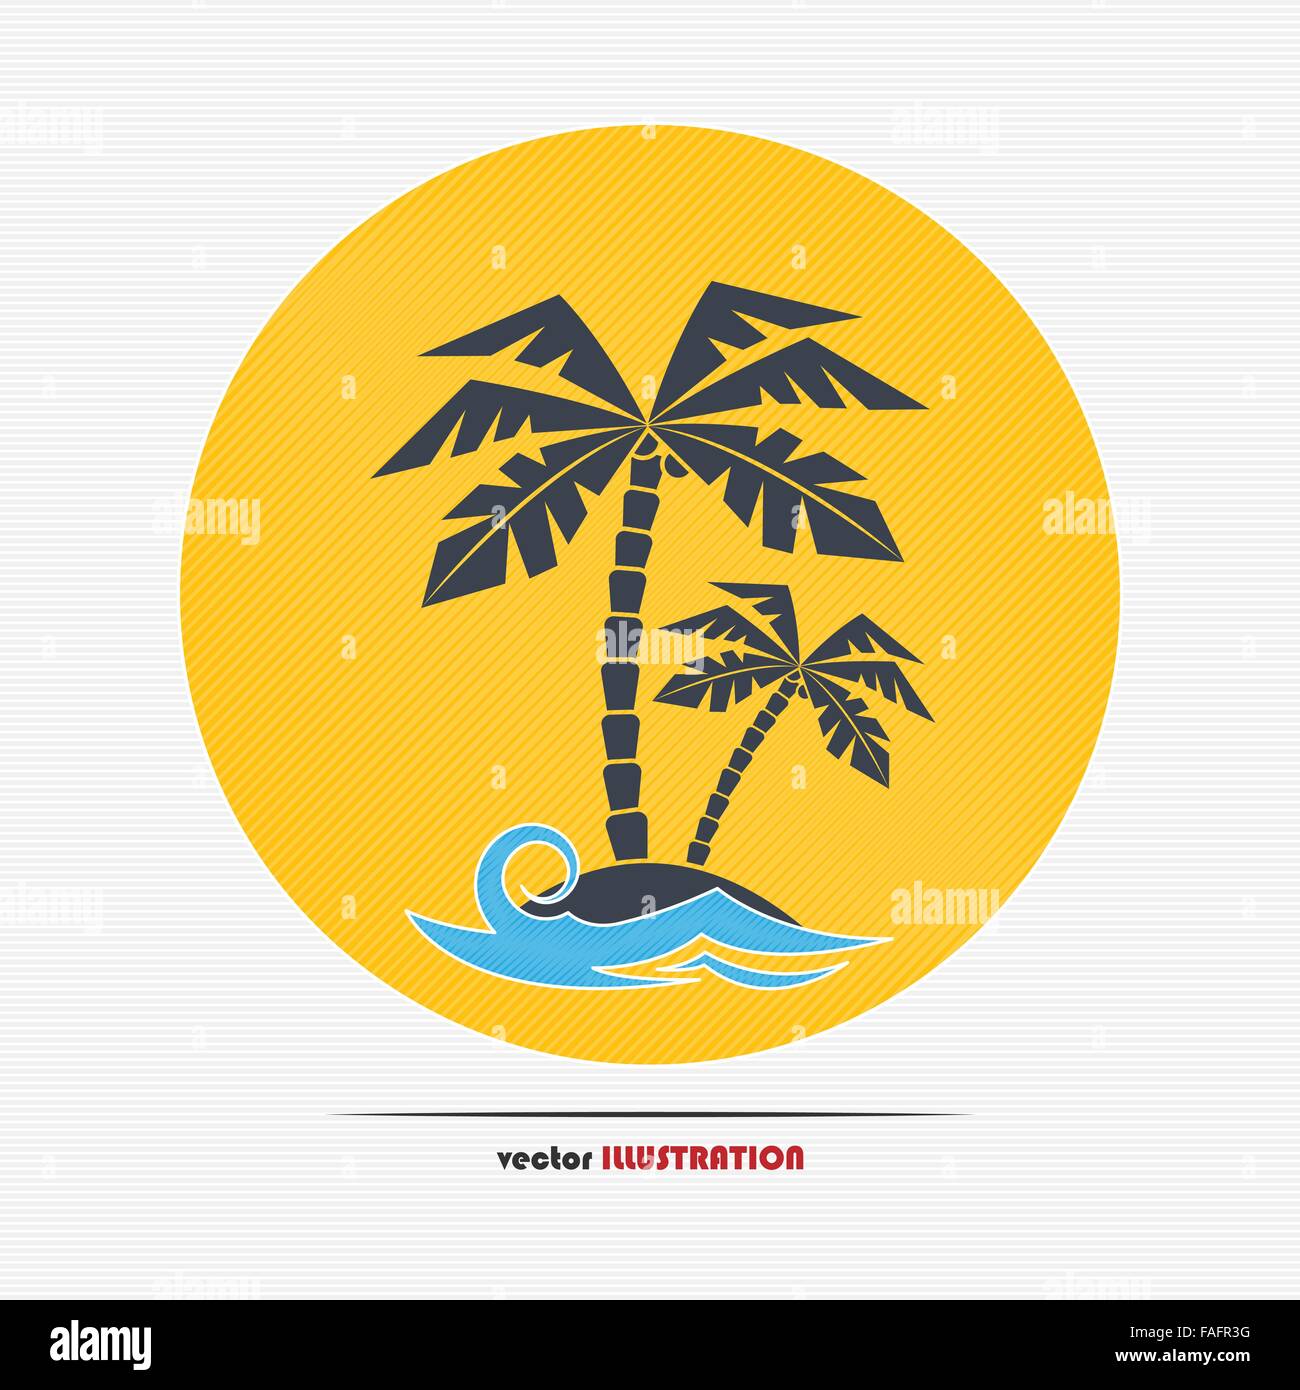 Abstract desert island with palm trees for your design Stock Vector